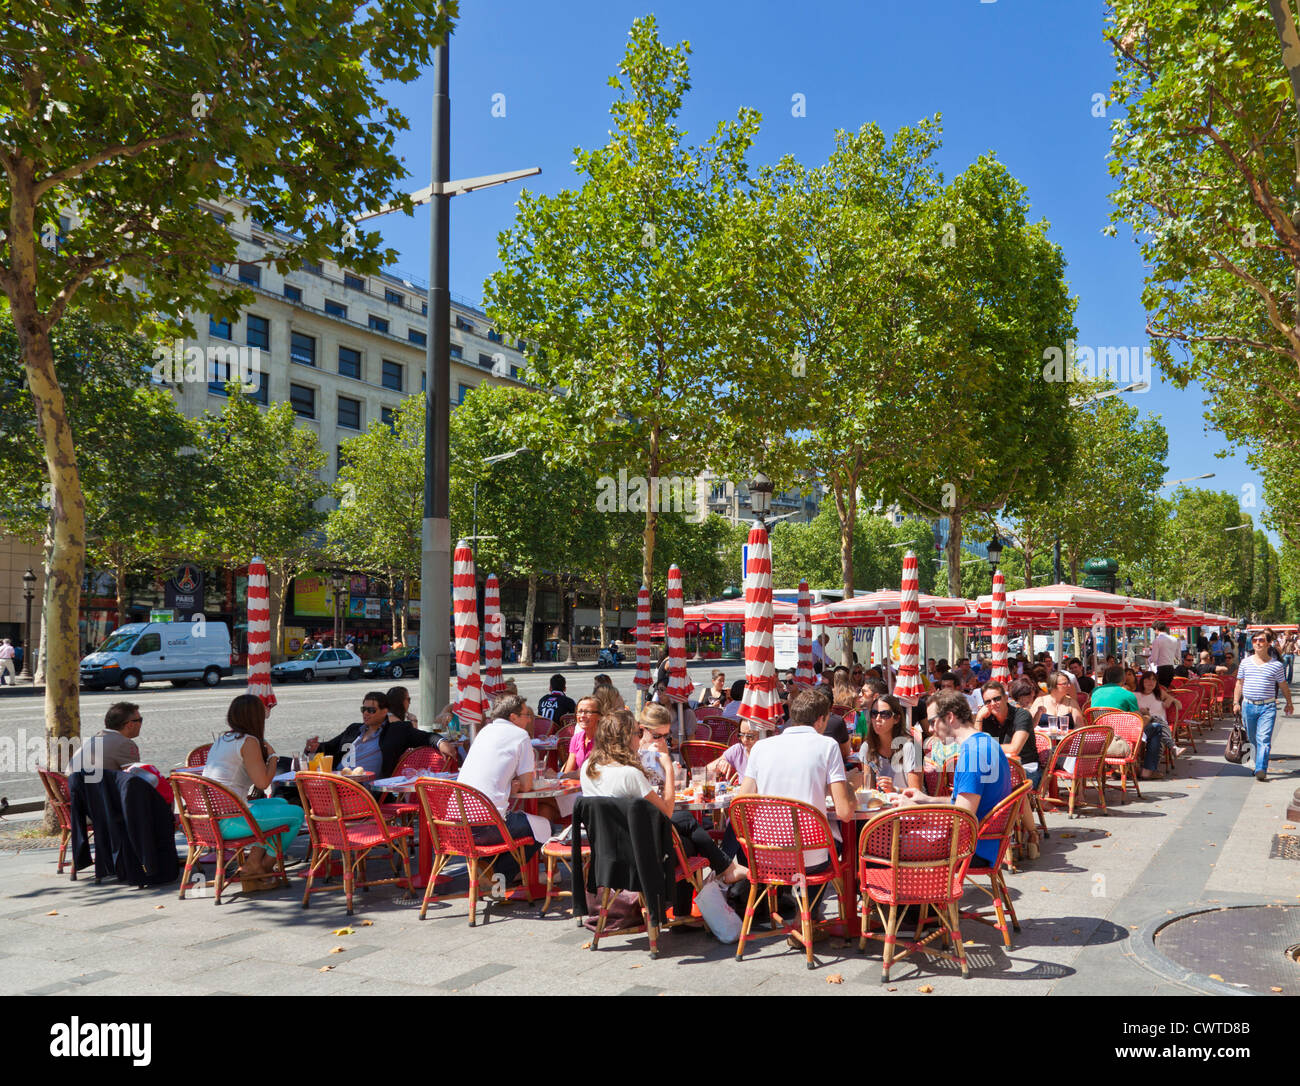 People sitting at a pavement cafe on the famous street the Champs Elysees avenue Paris France EU Europe Stock Photo